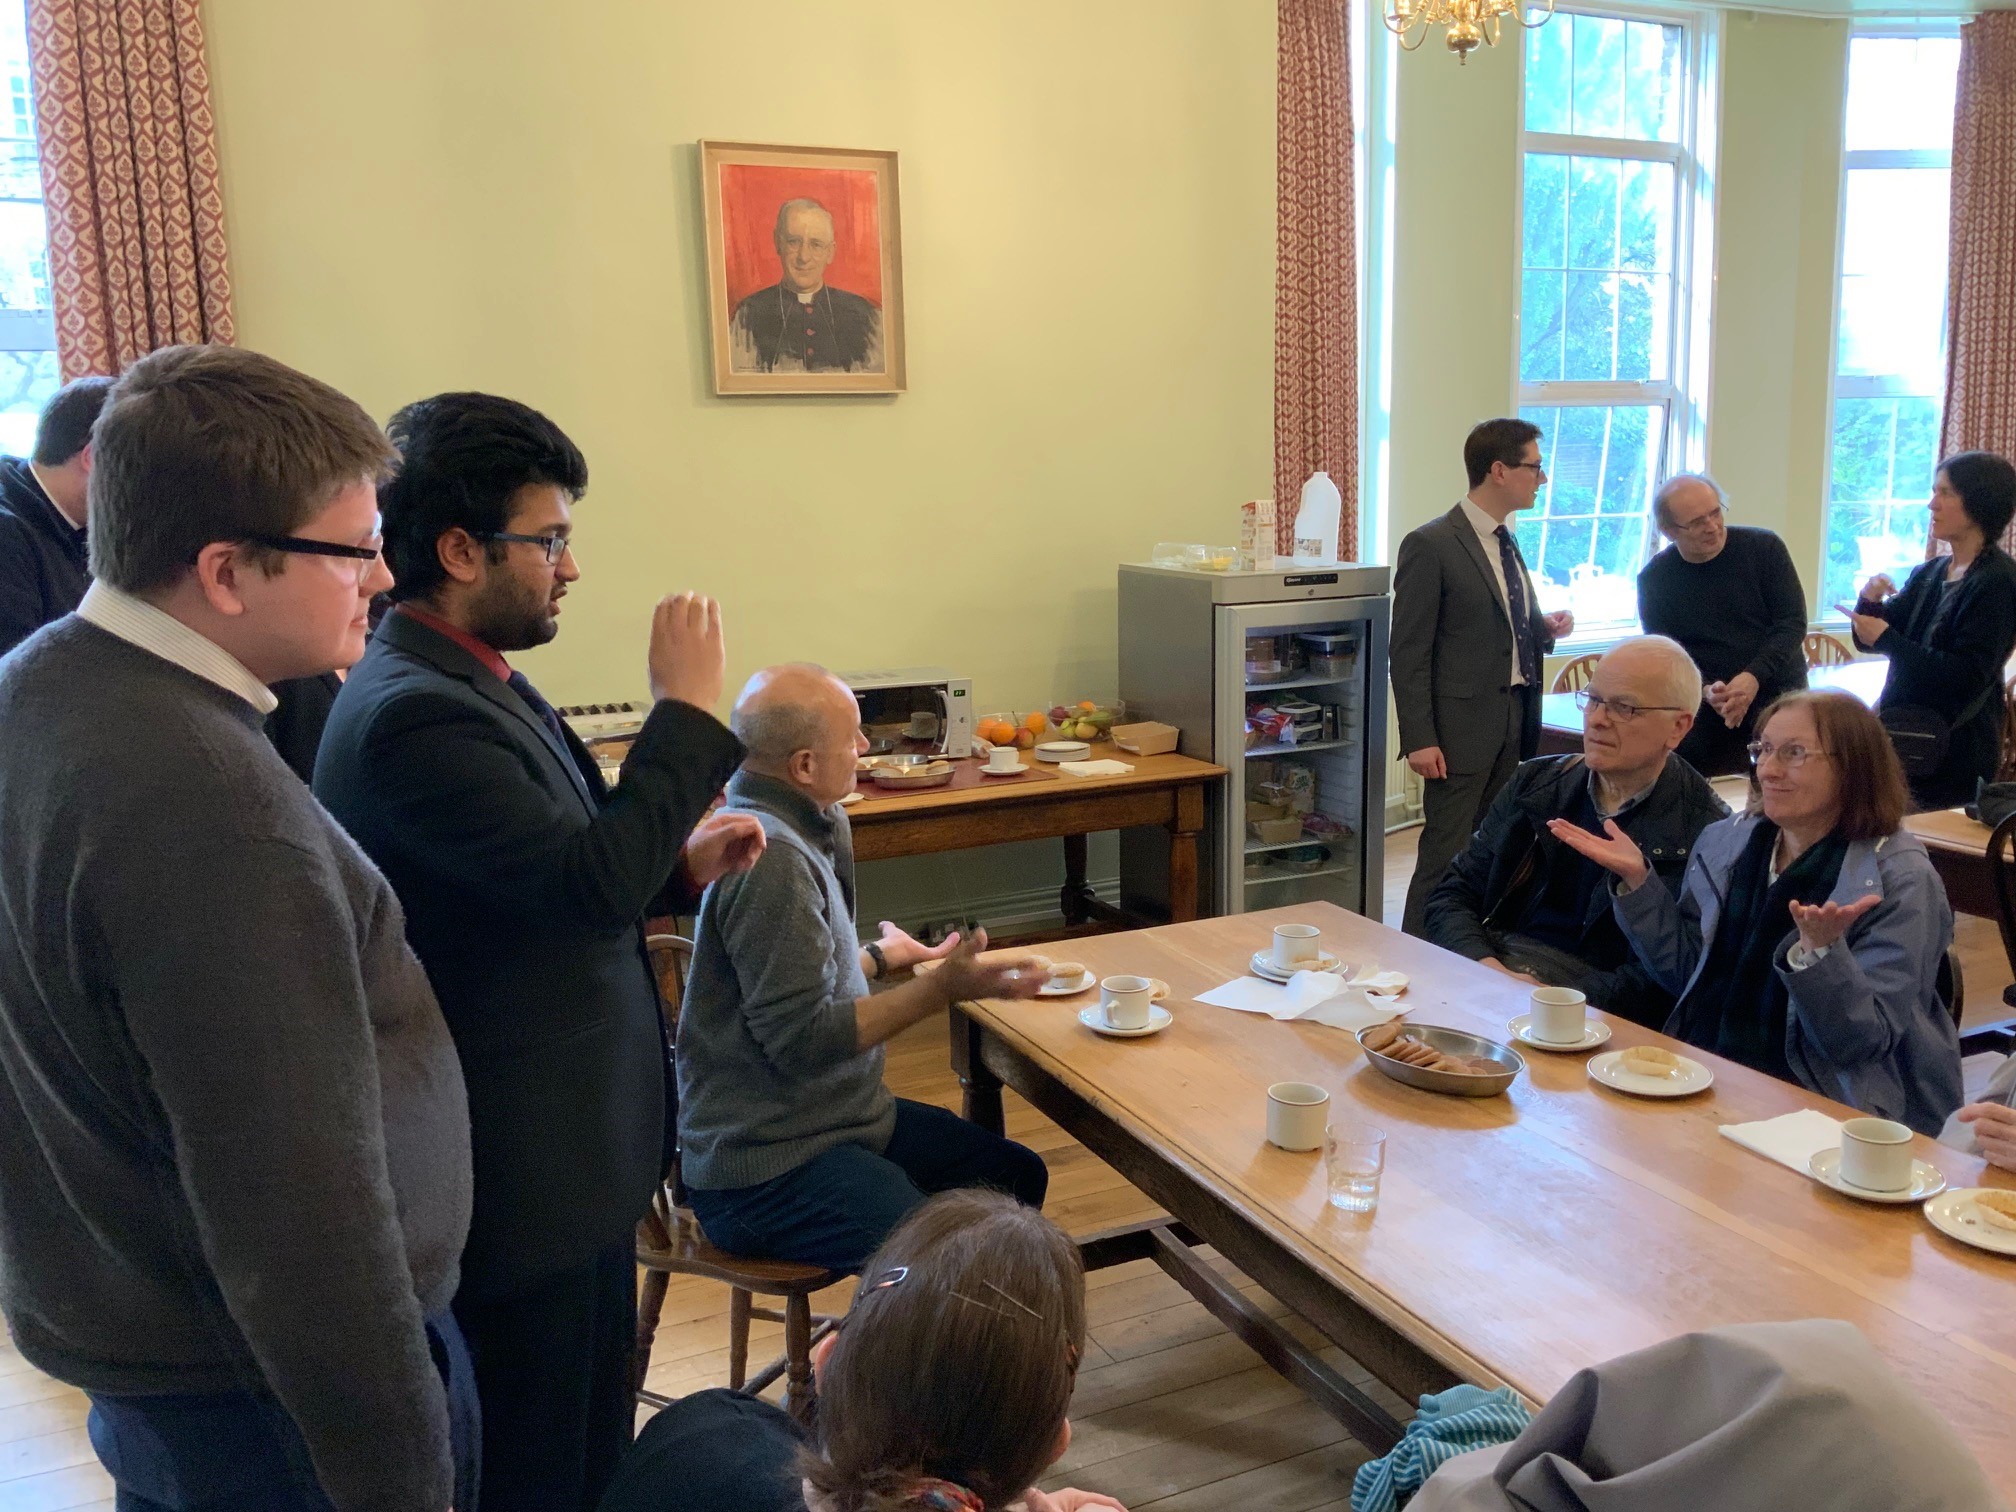 Refreshments after Mass in the seminary dining room. Seminarians chatting to members of the Deaf Community.